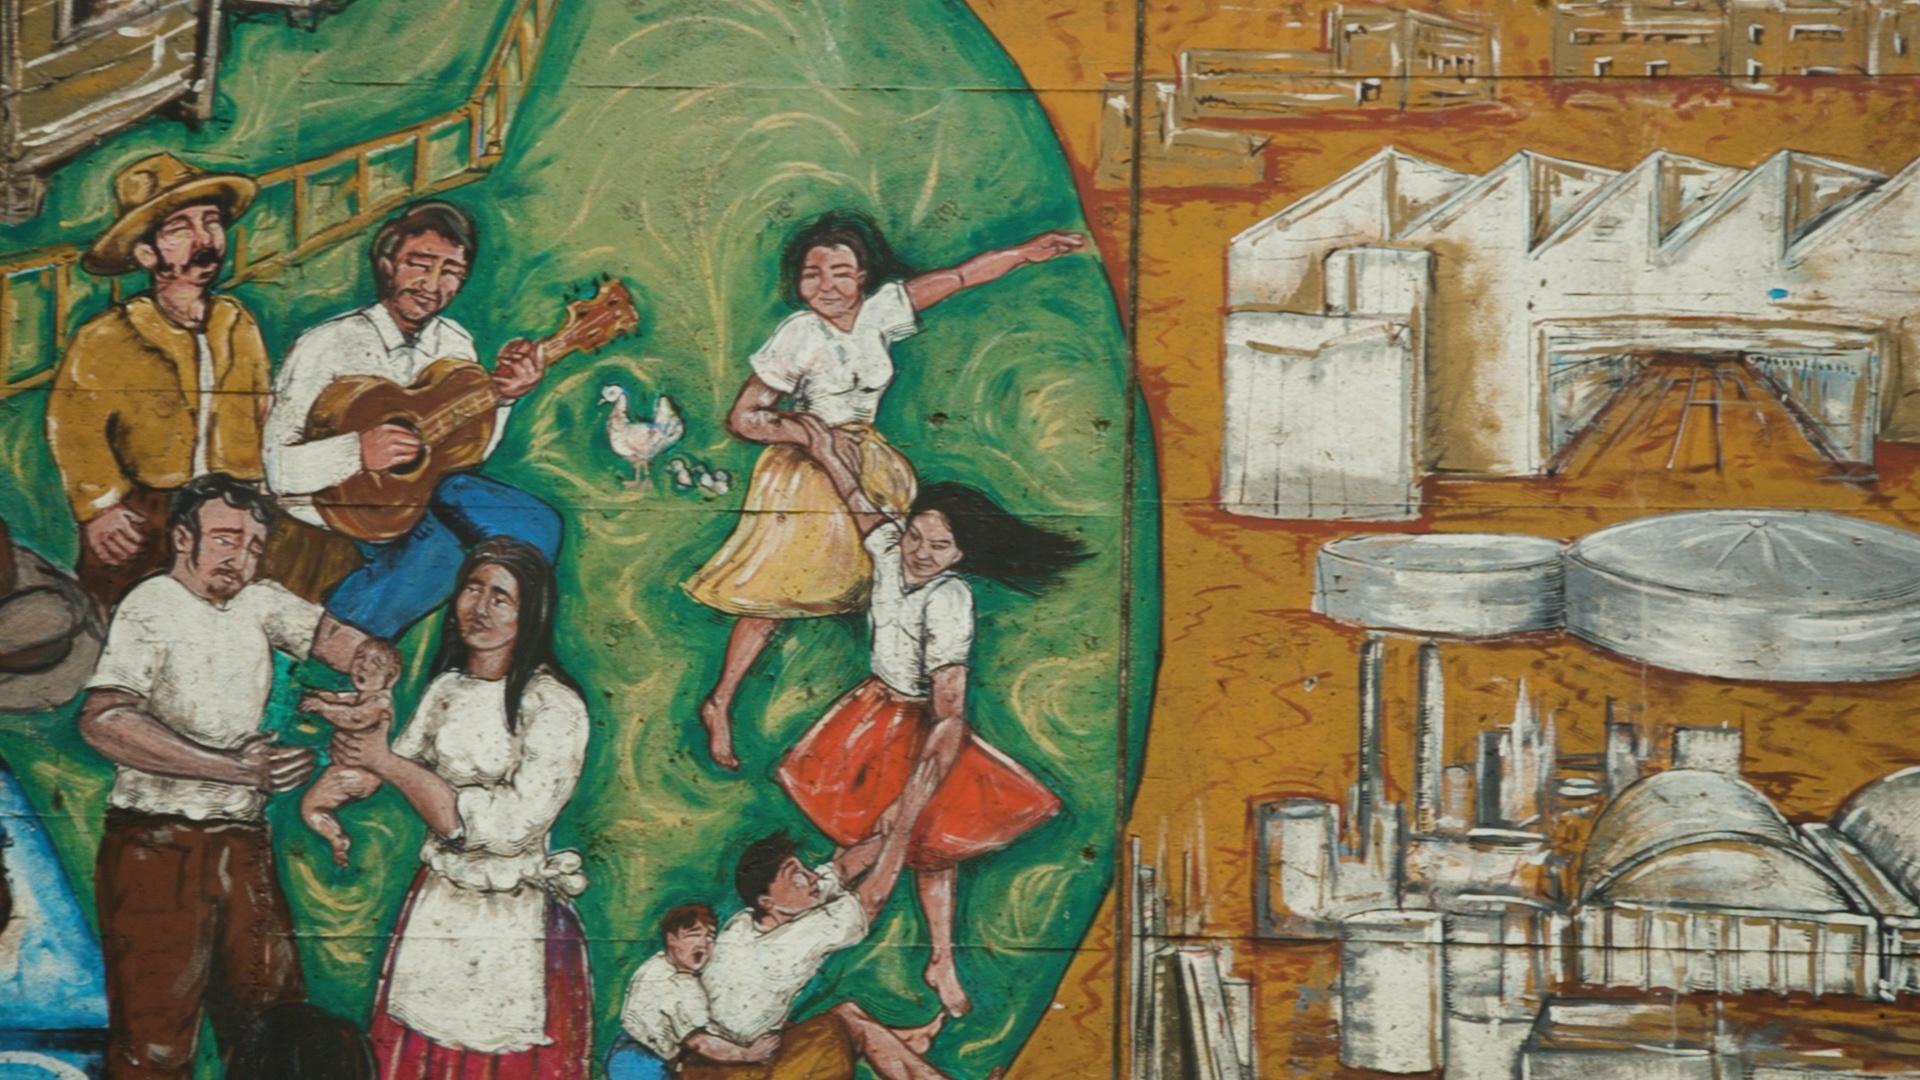 A section of mural depicting families next to an industrial area